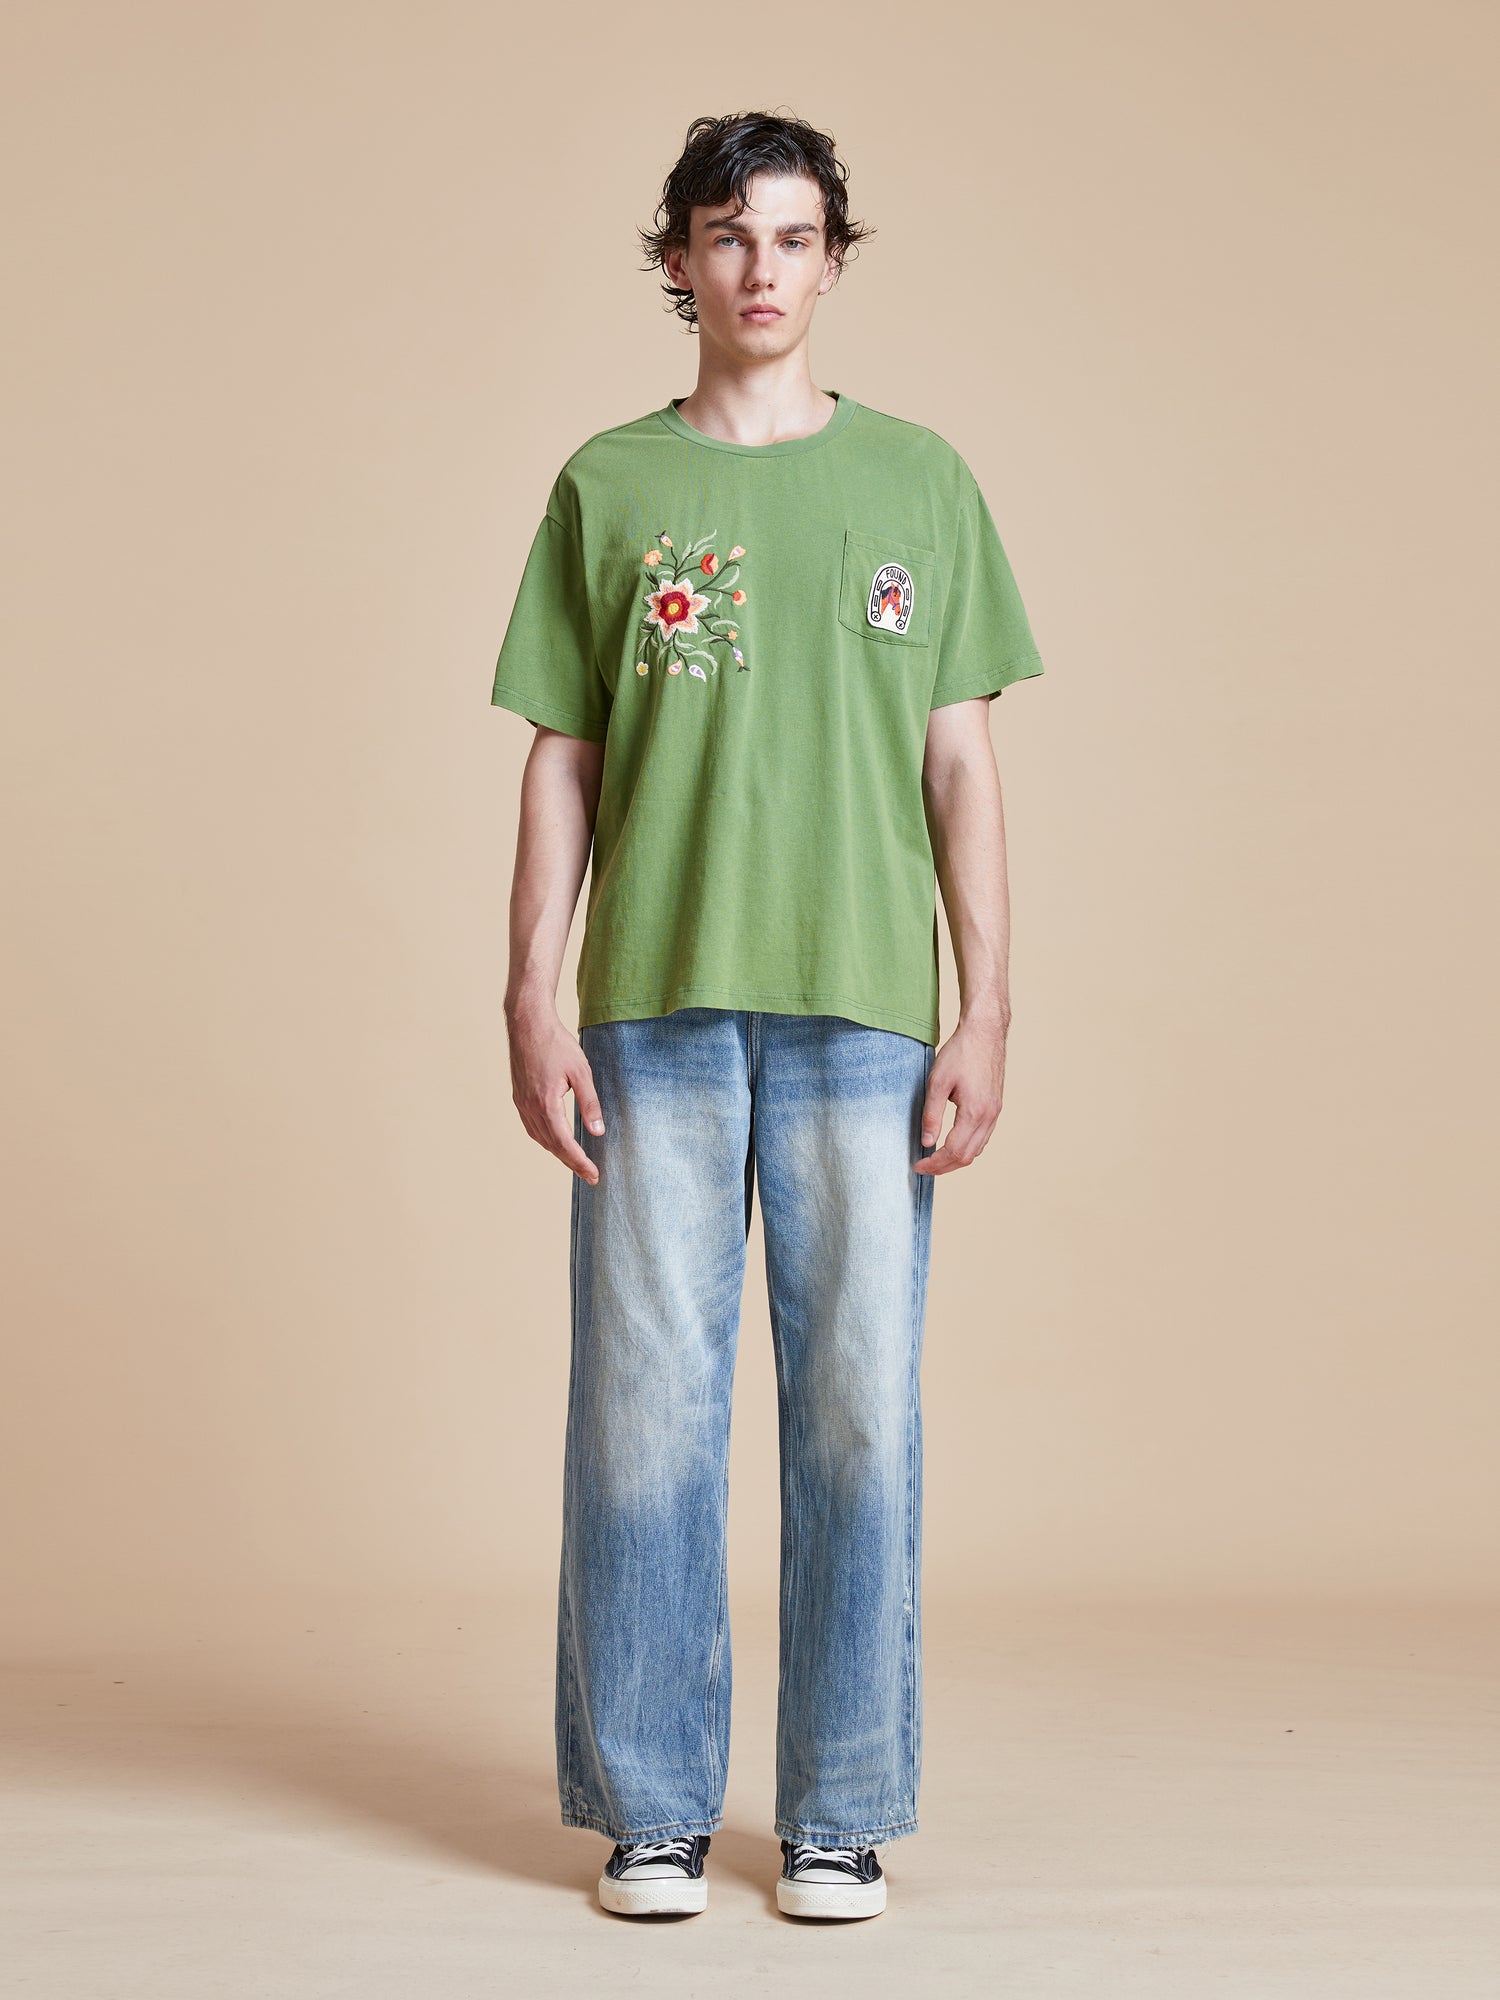 A man wearing a Pine Needle Farm Tee by Found and jeans.